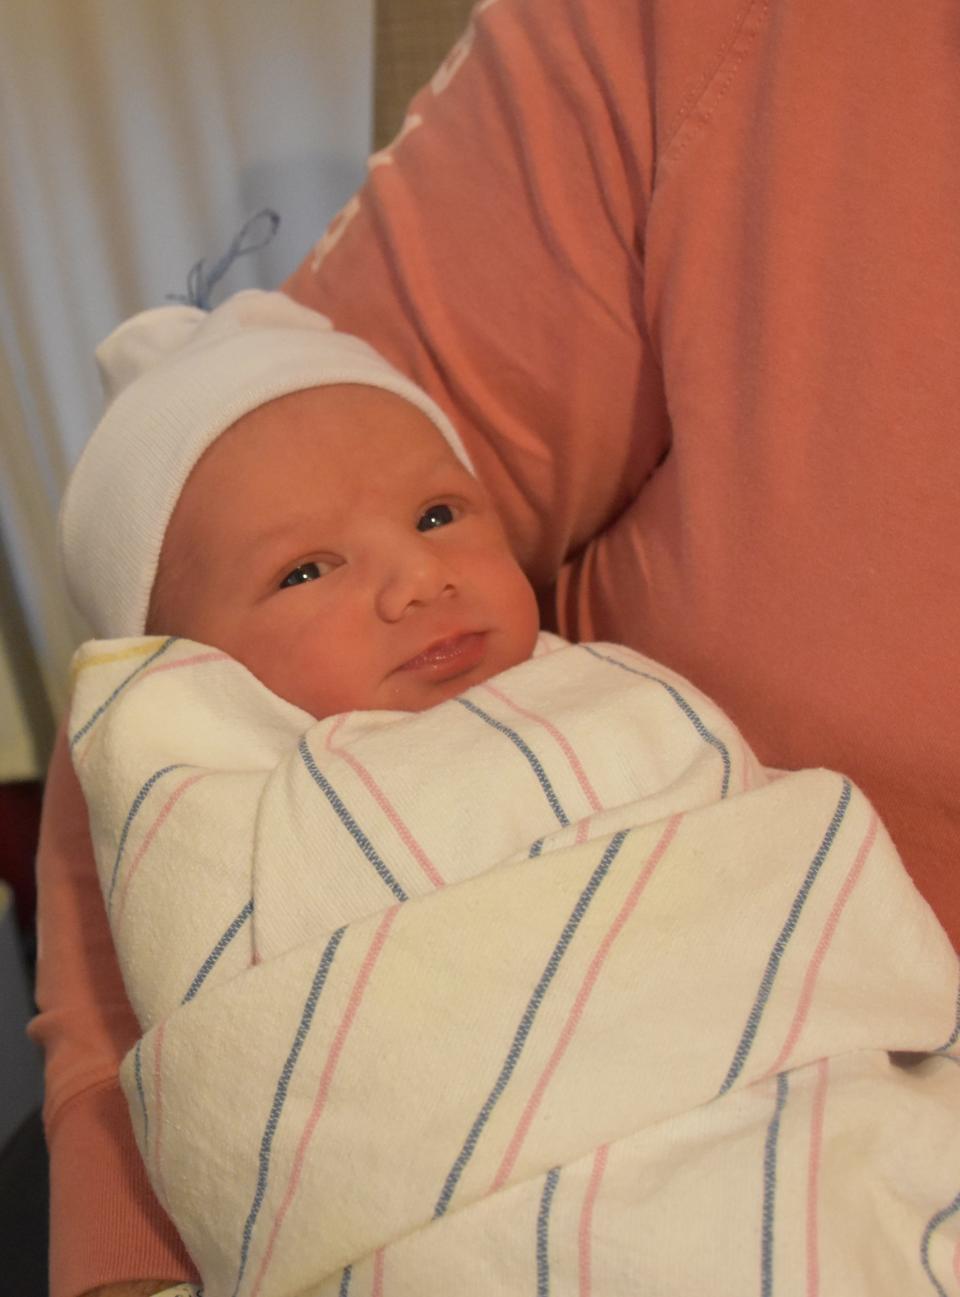 Brantley Burrows is the first baby of the New Year born at Wayne Memorial Hospital’s New Beginnings Birthing Suites. He arrived on Monday, January 2nd at 3:37 p.m to parents Anastasia Dunlap and Damian Burrows of Starrucca, Pennsylvania.